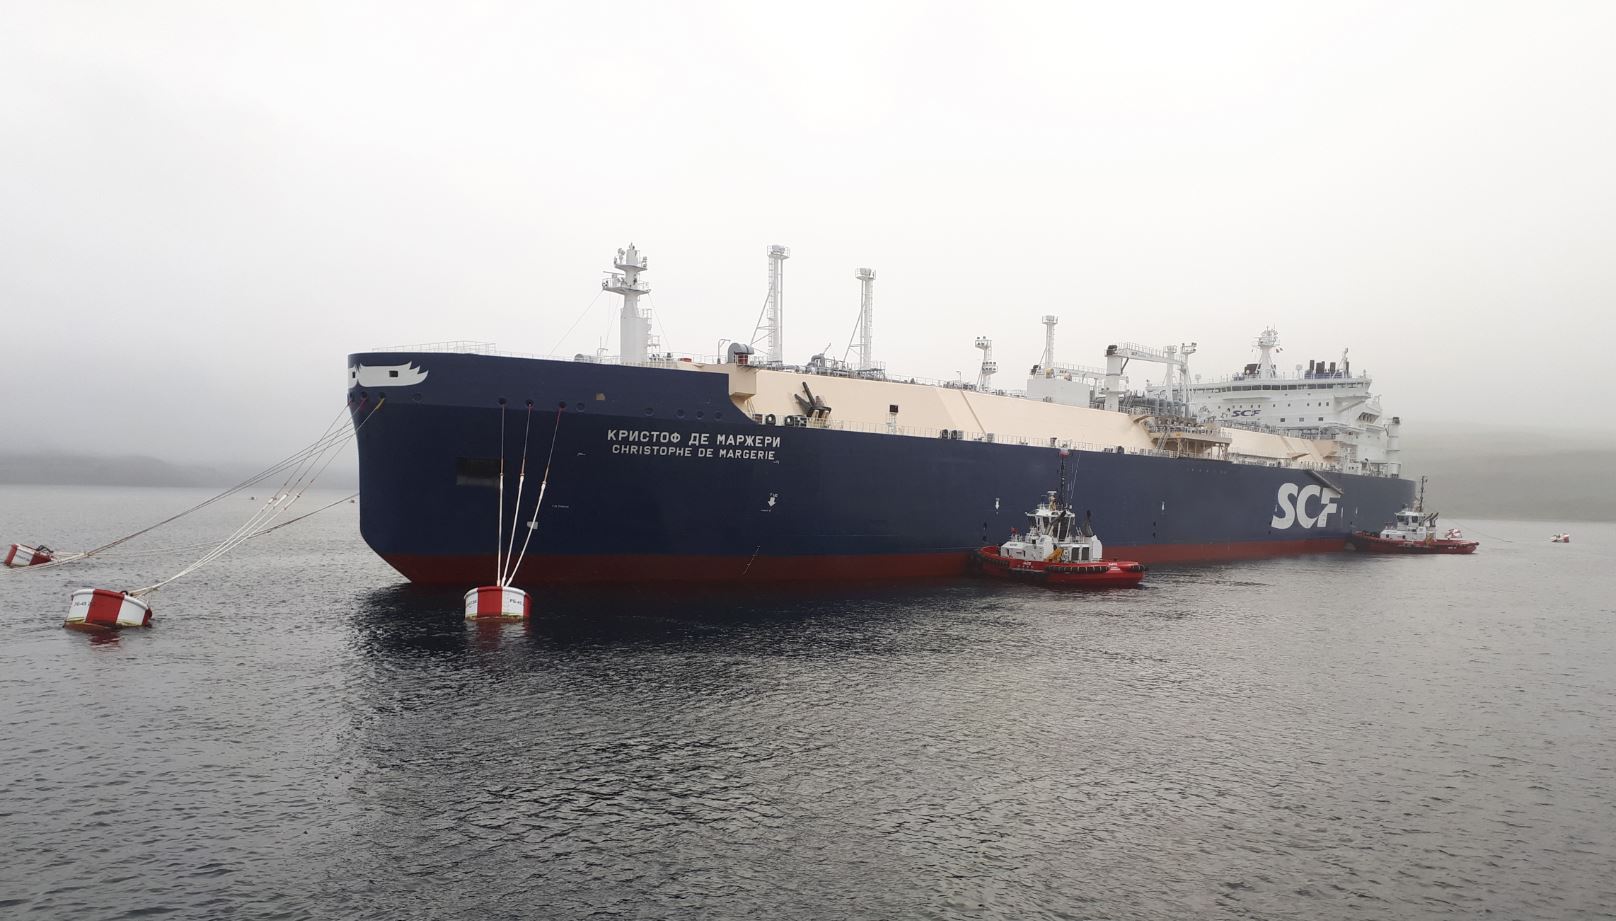 SCF LNG carrier completes test call at Kildin anchorage